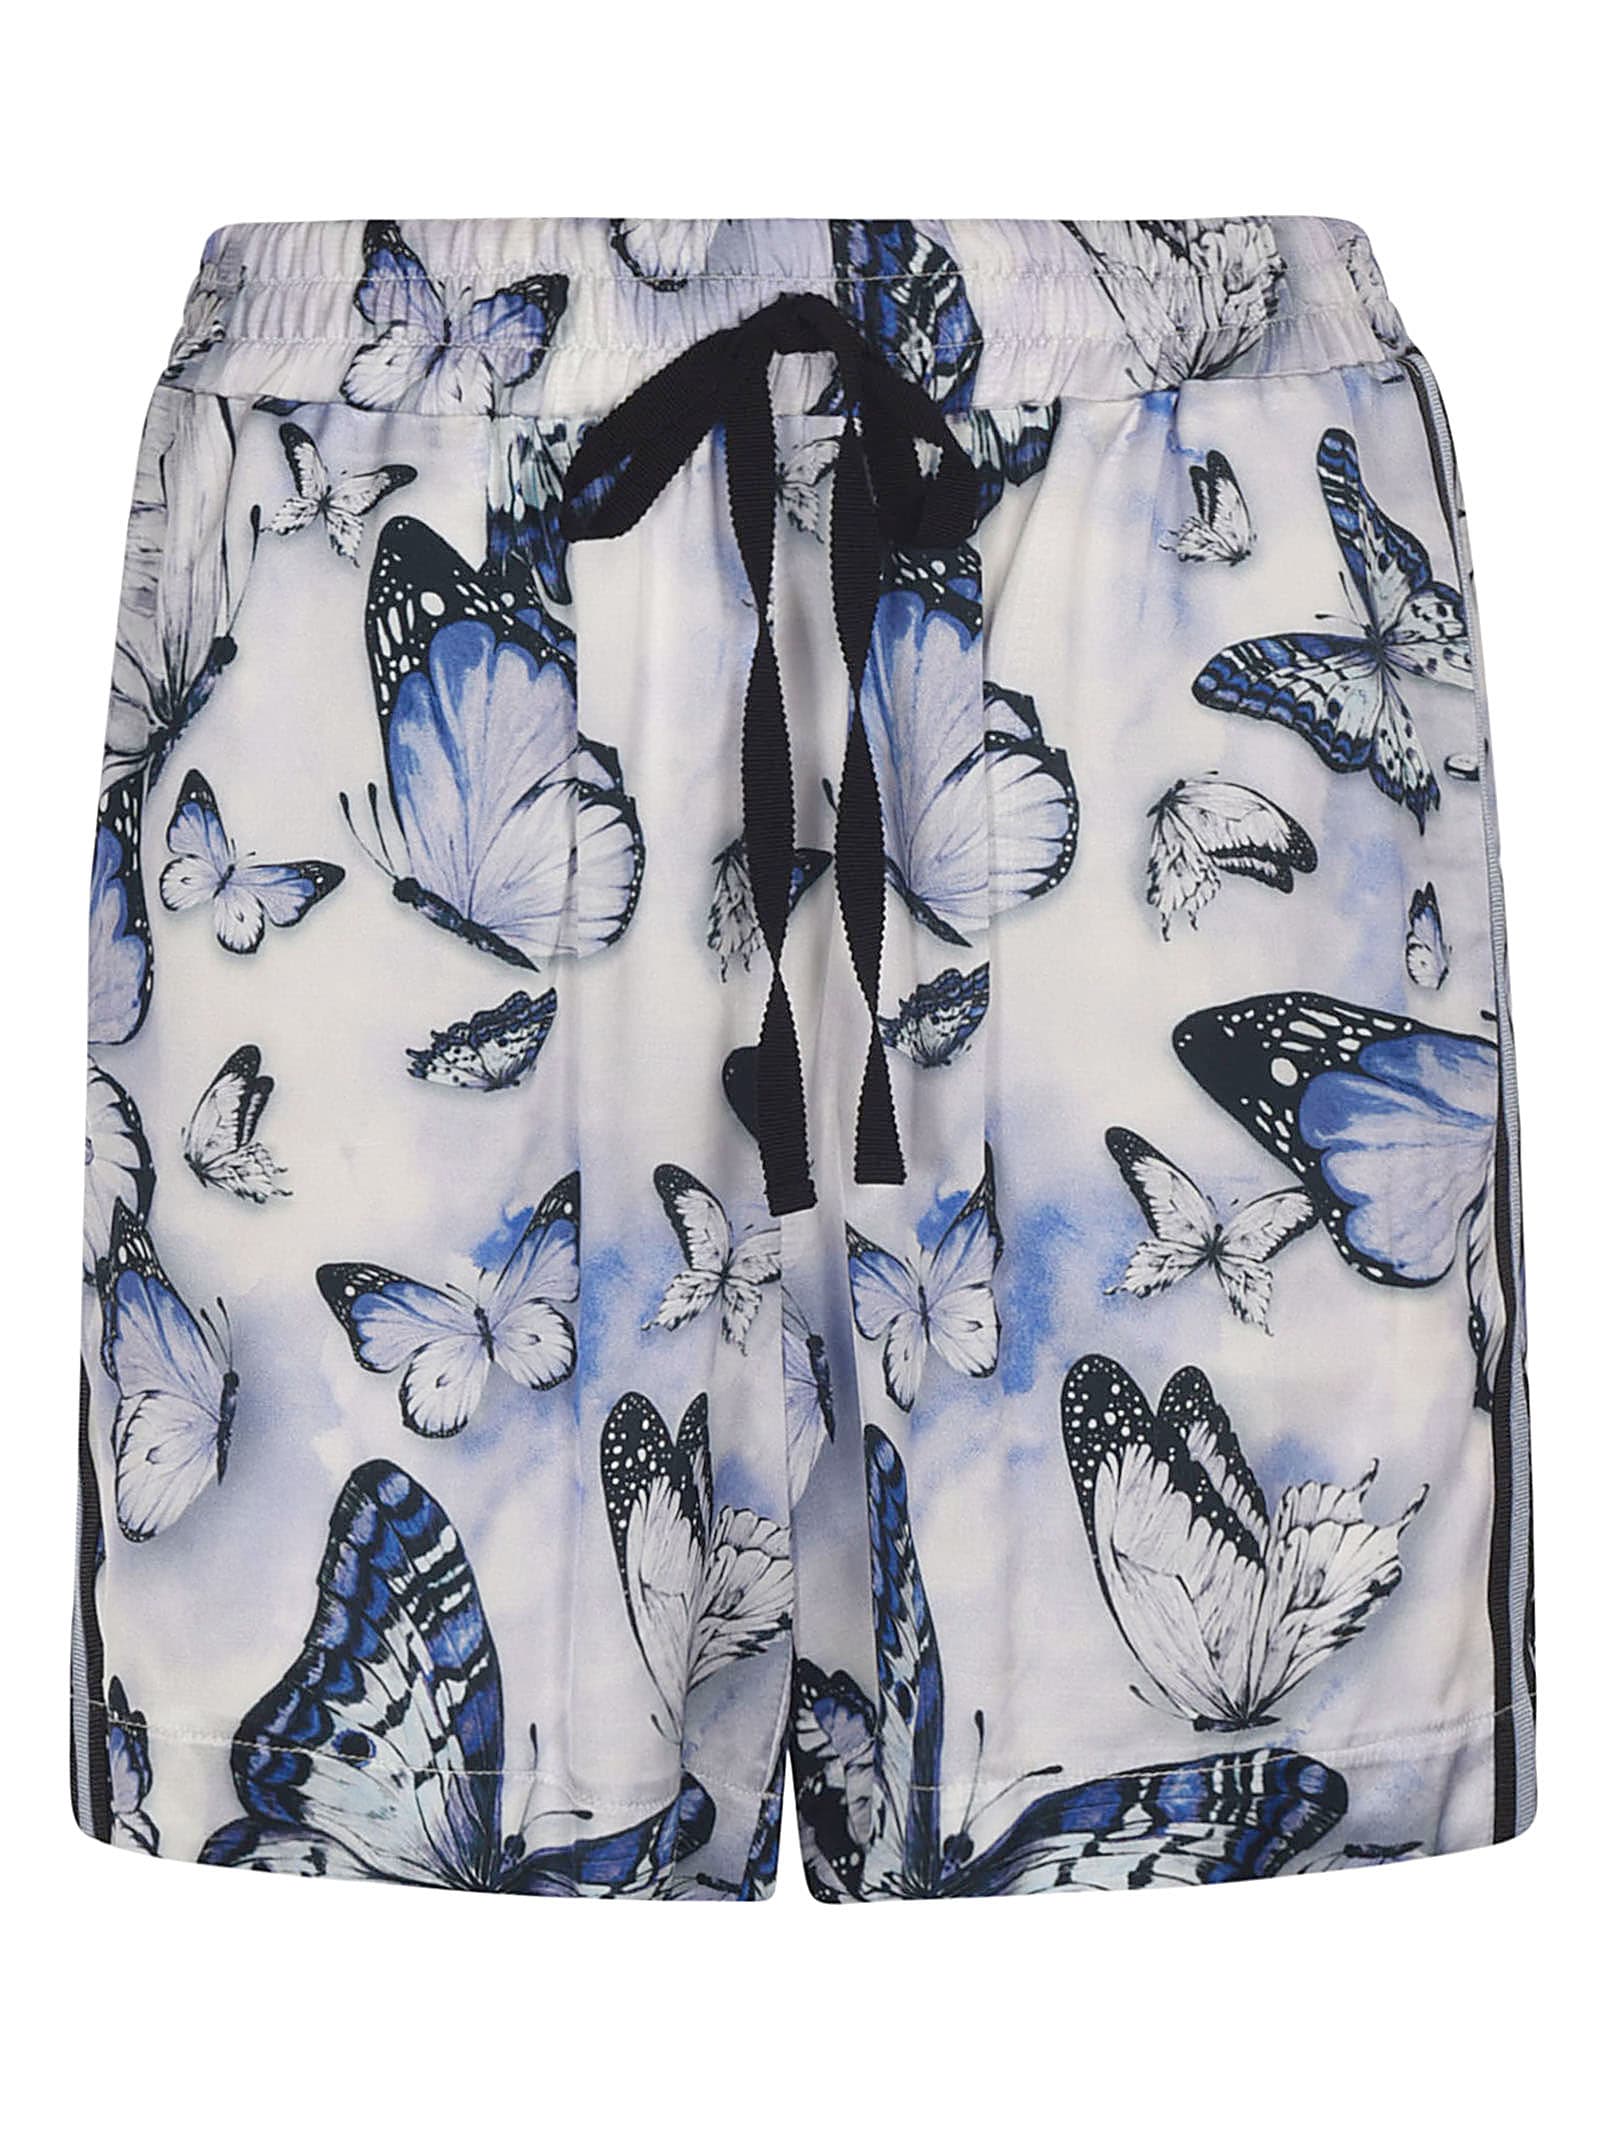 Ermanno Ermanno Scervino Butterfly Print Shorts